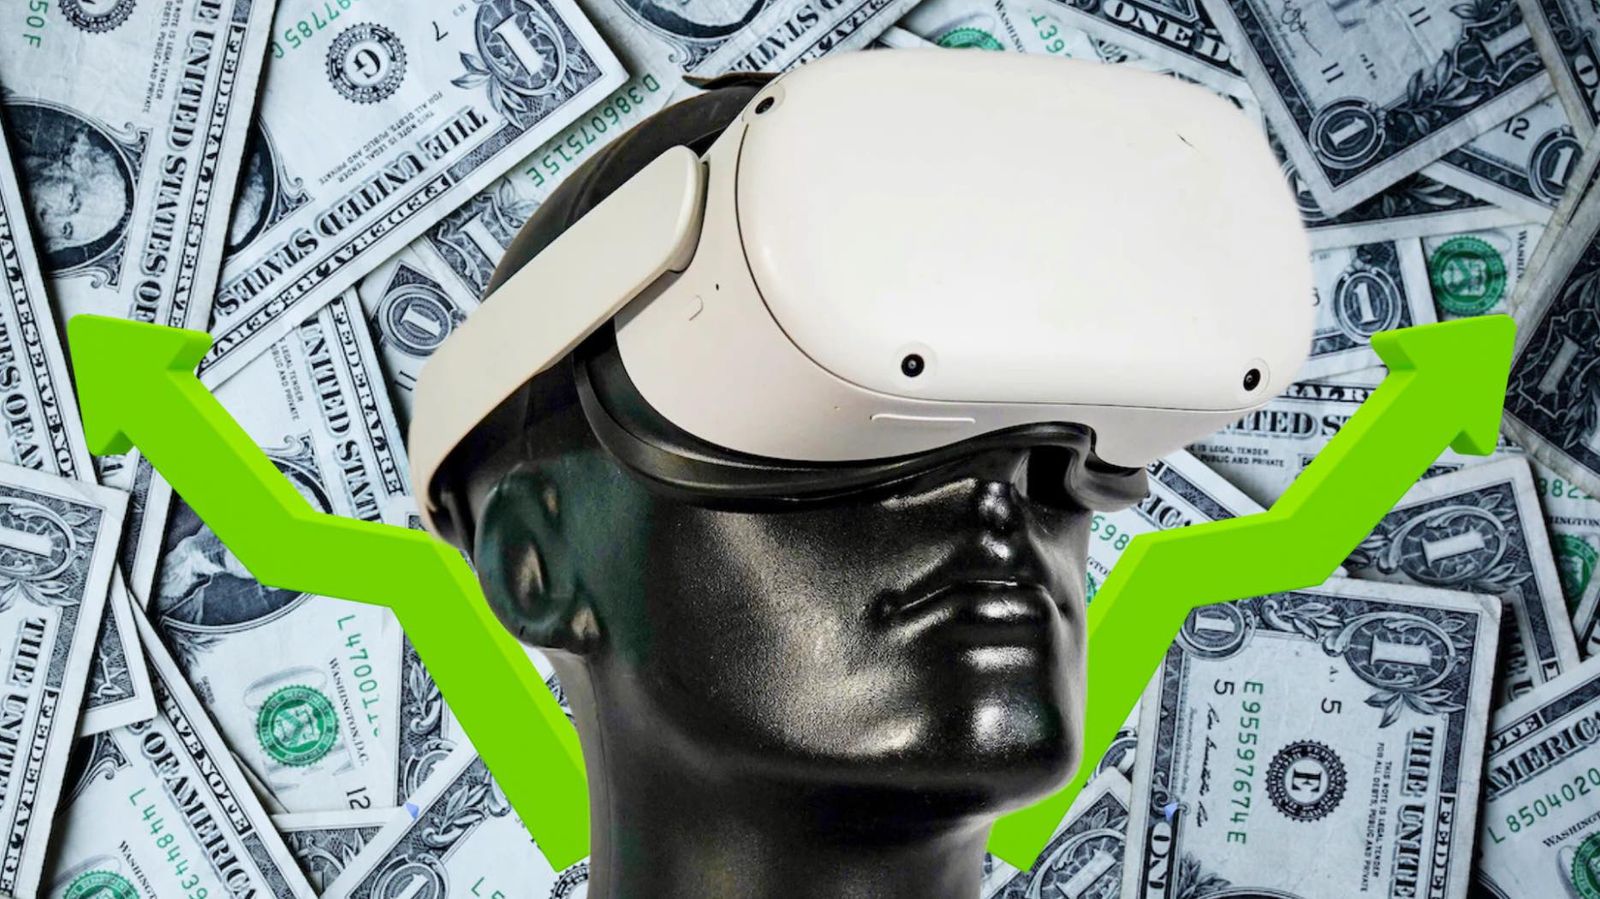 A Meta Quest 2 VR headset on a background of money with positive stock in the background